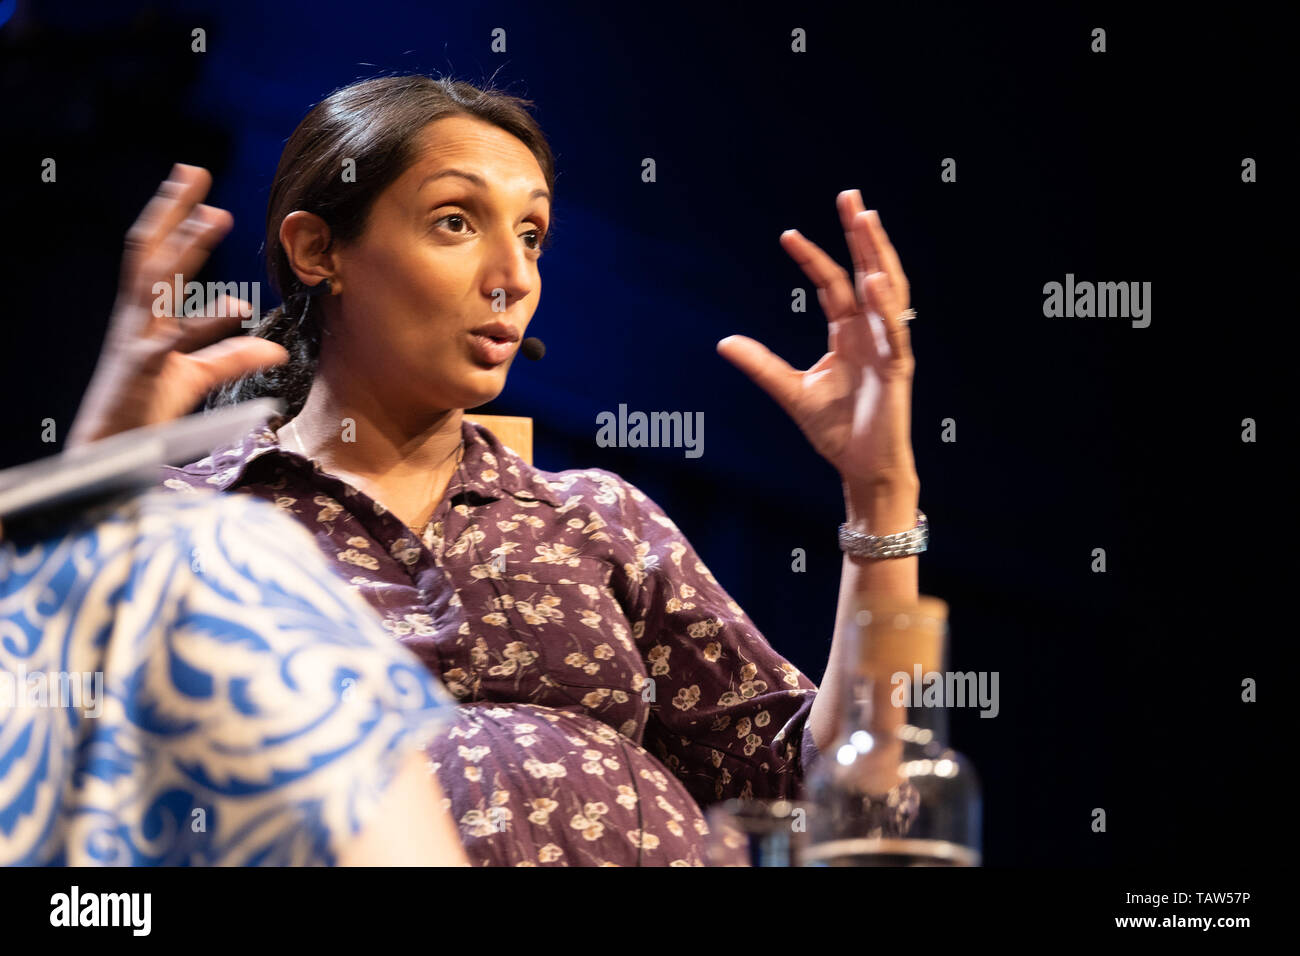 The Hay Festival, Hay on Wye, Wales UK, Tuesday 28th May 2019. Journalist and travel writer MONISHA RAJESH tlkig about her book 'Aroud the World in 80 Trains' at the 32nd annual Hay Festival of Literature and the Arts. The festival, held every year in the small town of Hay on Wye on the Wales - England border, attracts the finest writers, politicians and intellectuals from across the globe for 10 days of celebration of the best of the written word and critical debate Photo Credit: keith morris/Alamy Live News Stock Photo